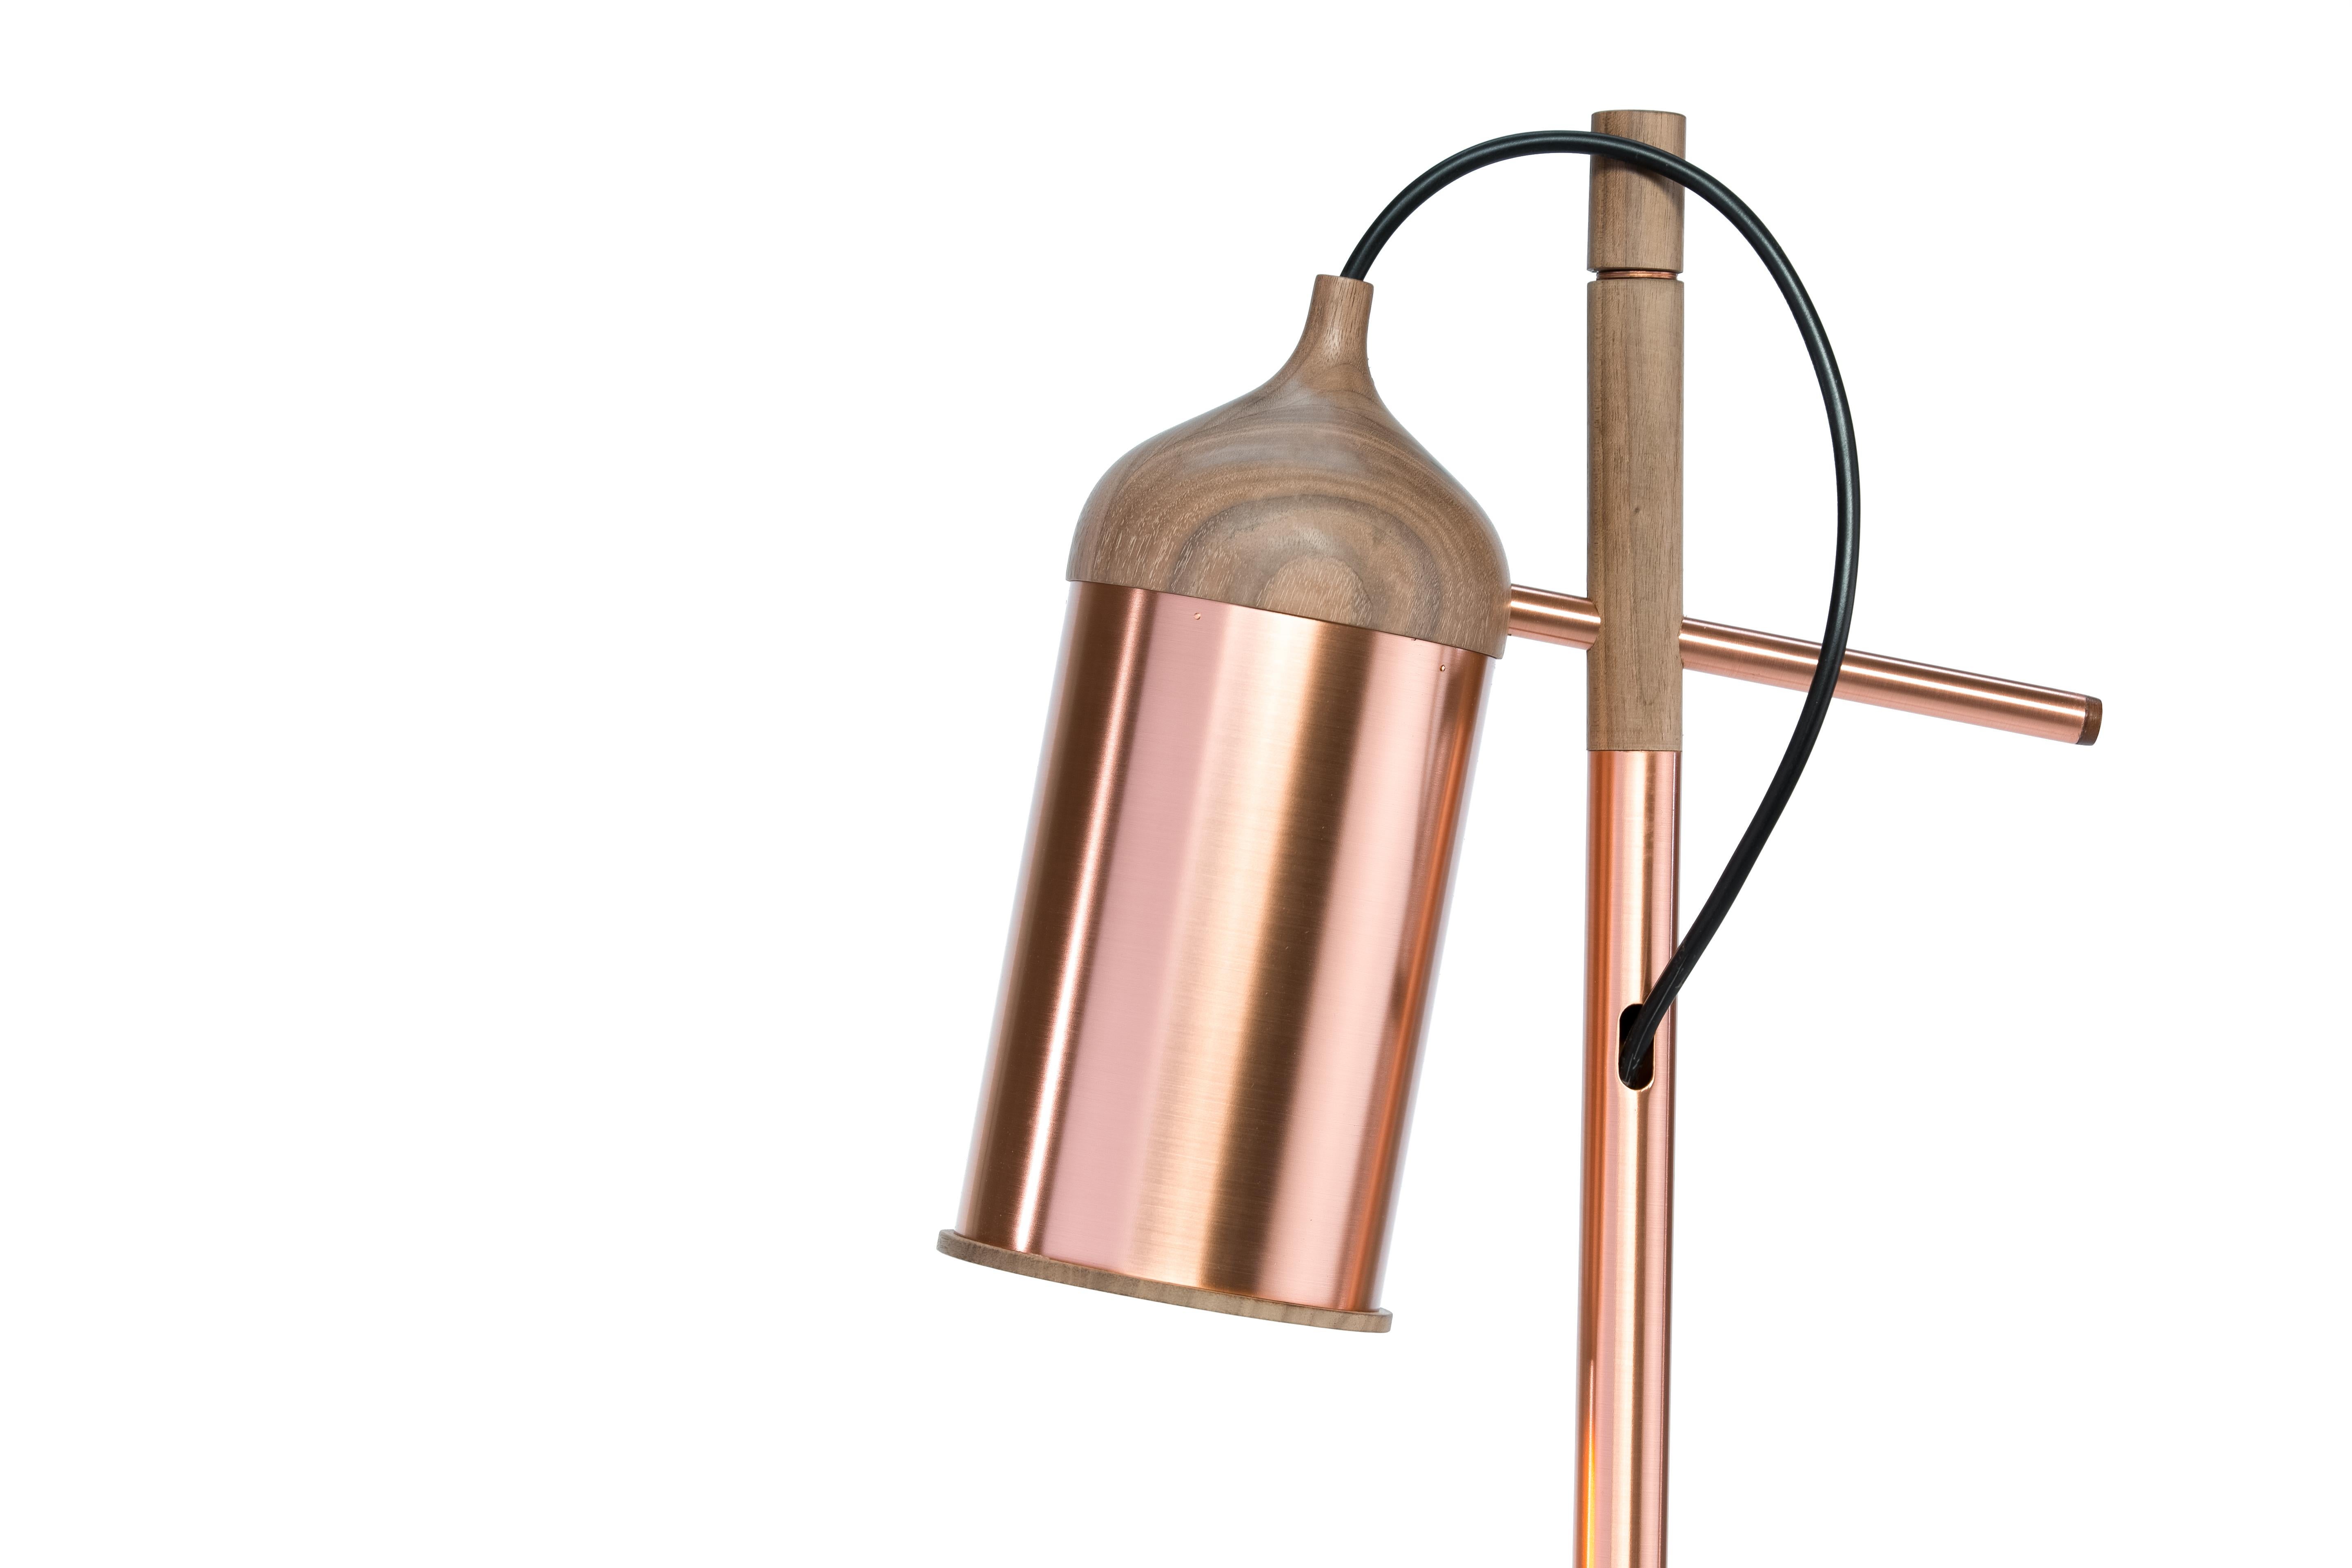 The copper floor lamp is a unique design by Steven Banken as a follow up on his popular Copper Lamp (pendant). For ultimate flexibility, the shade can be rotated in every desired direction. The weighted base of the lamp ensures that the lamp is very